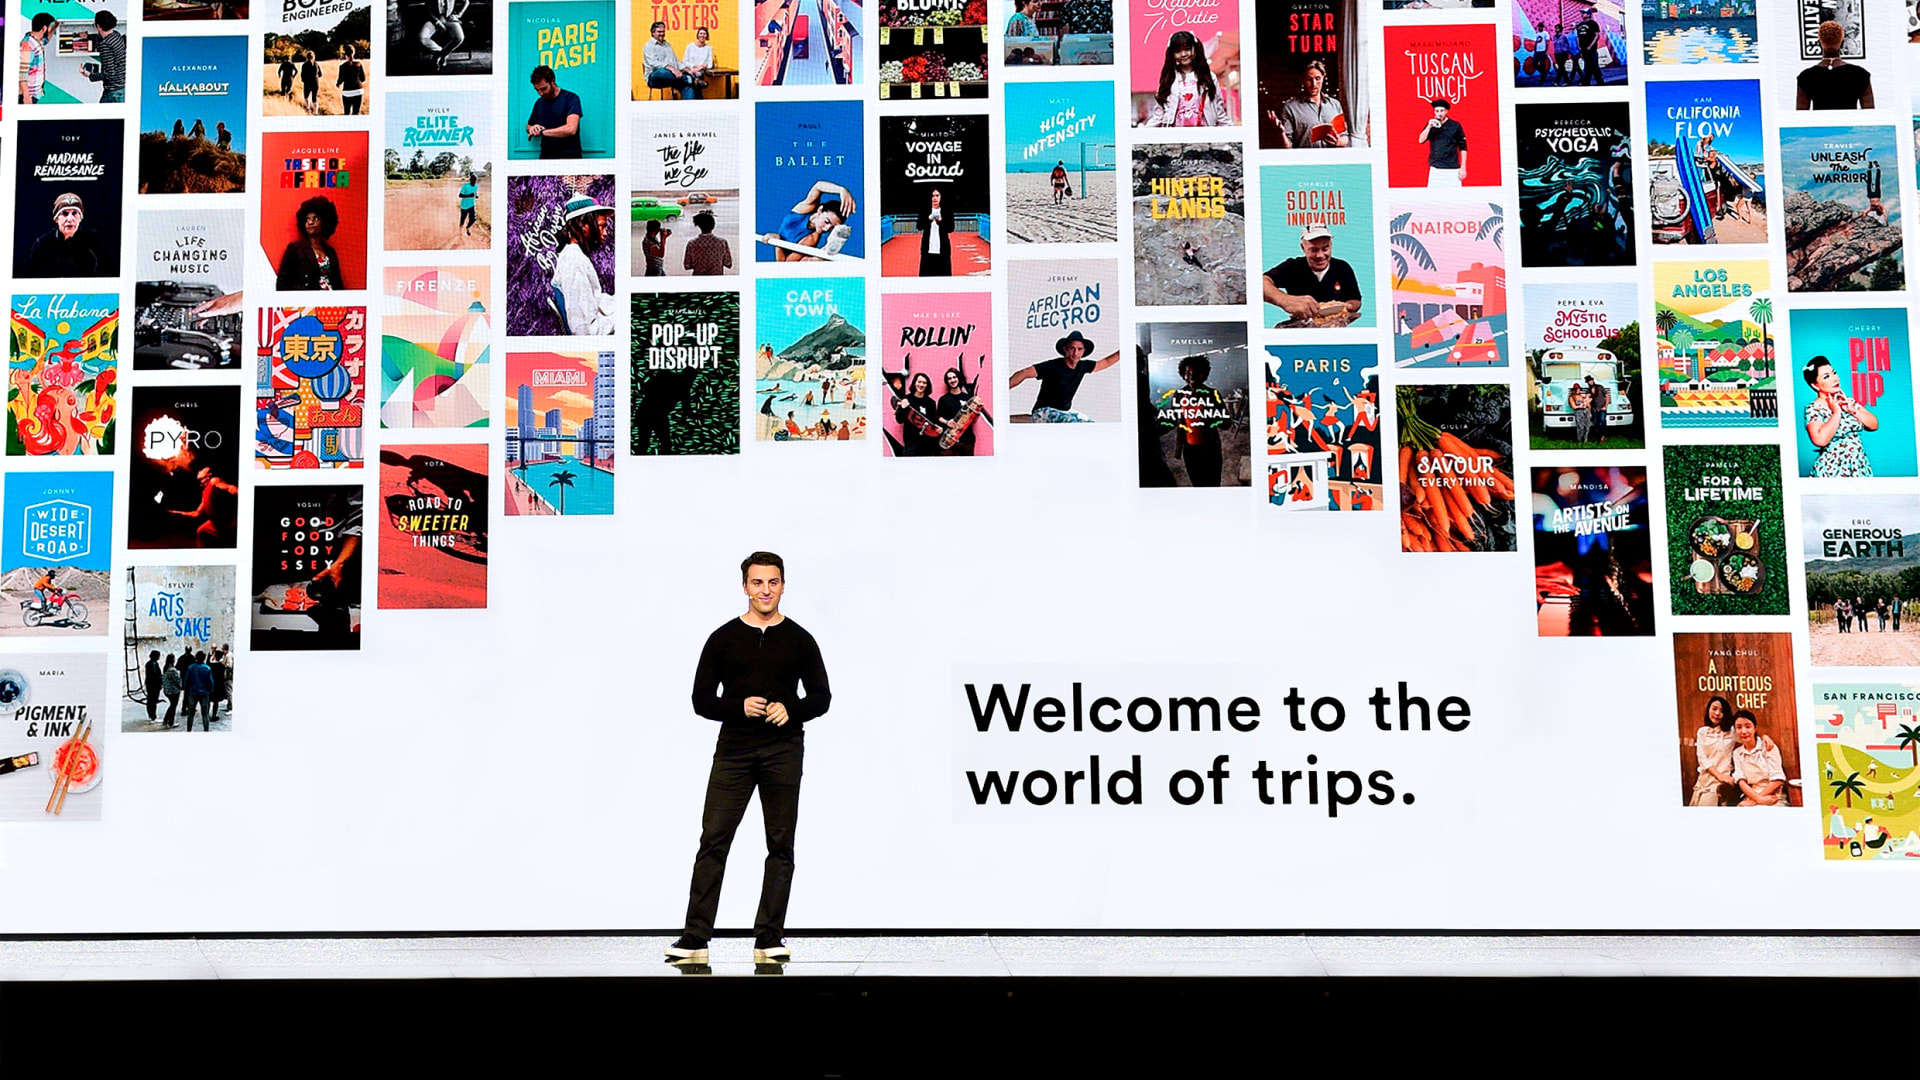 Airbnb files to go public: Here’s what it says are its 6 biggest risk factors